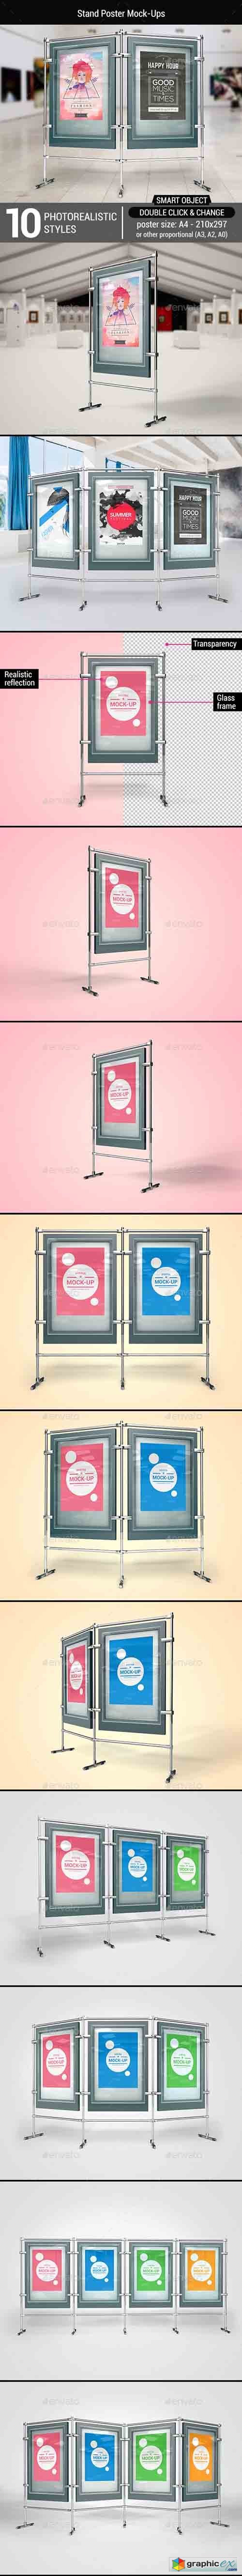 Stand Poster Mock-Ups